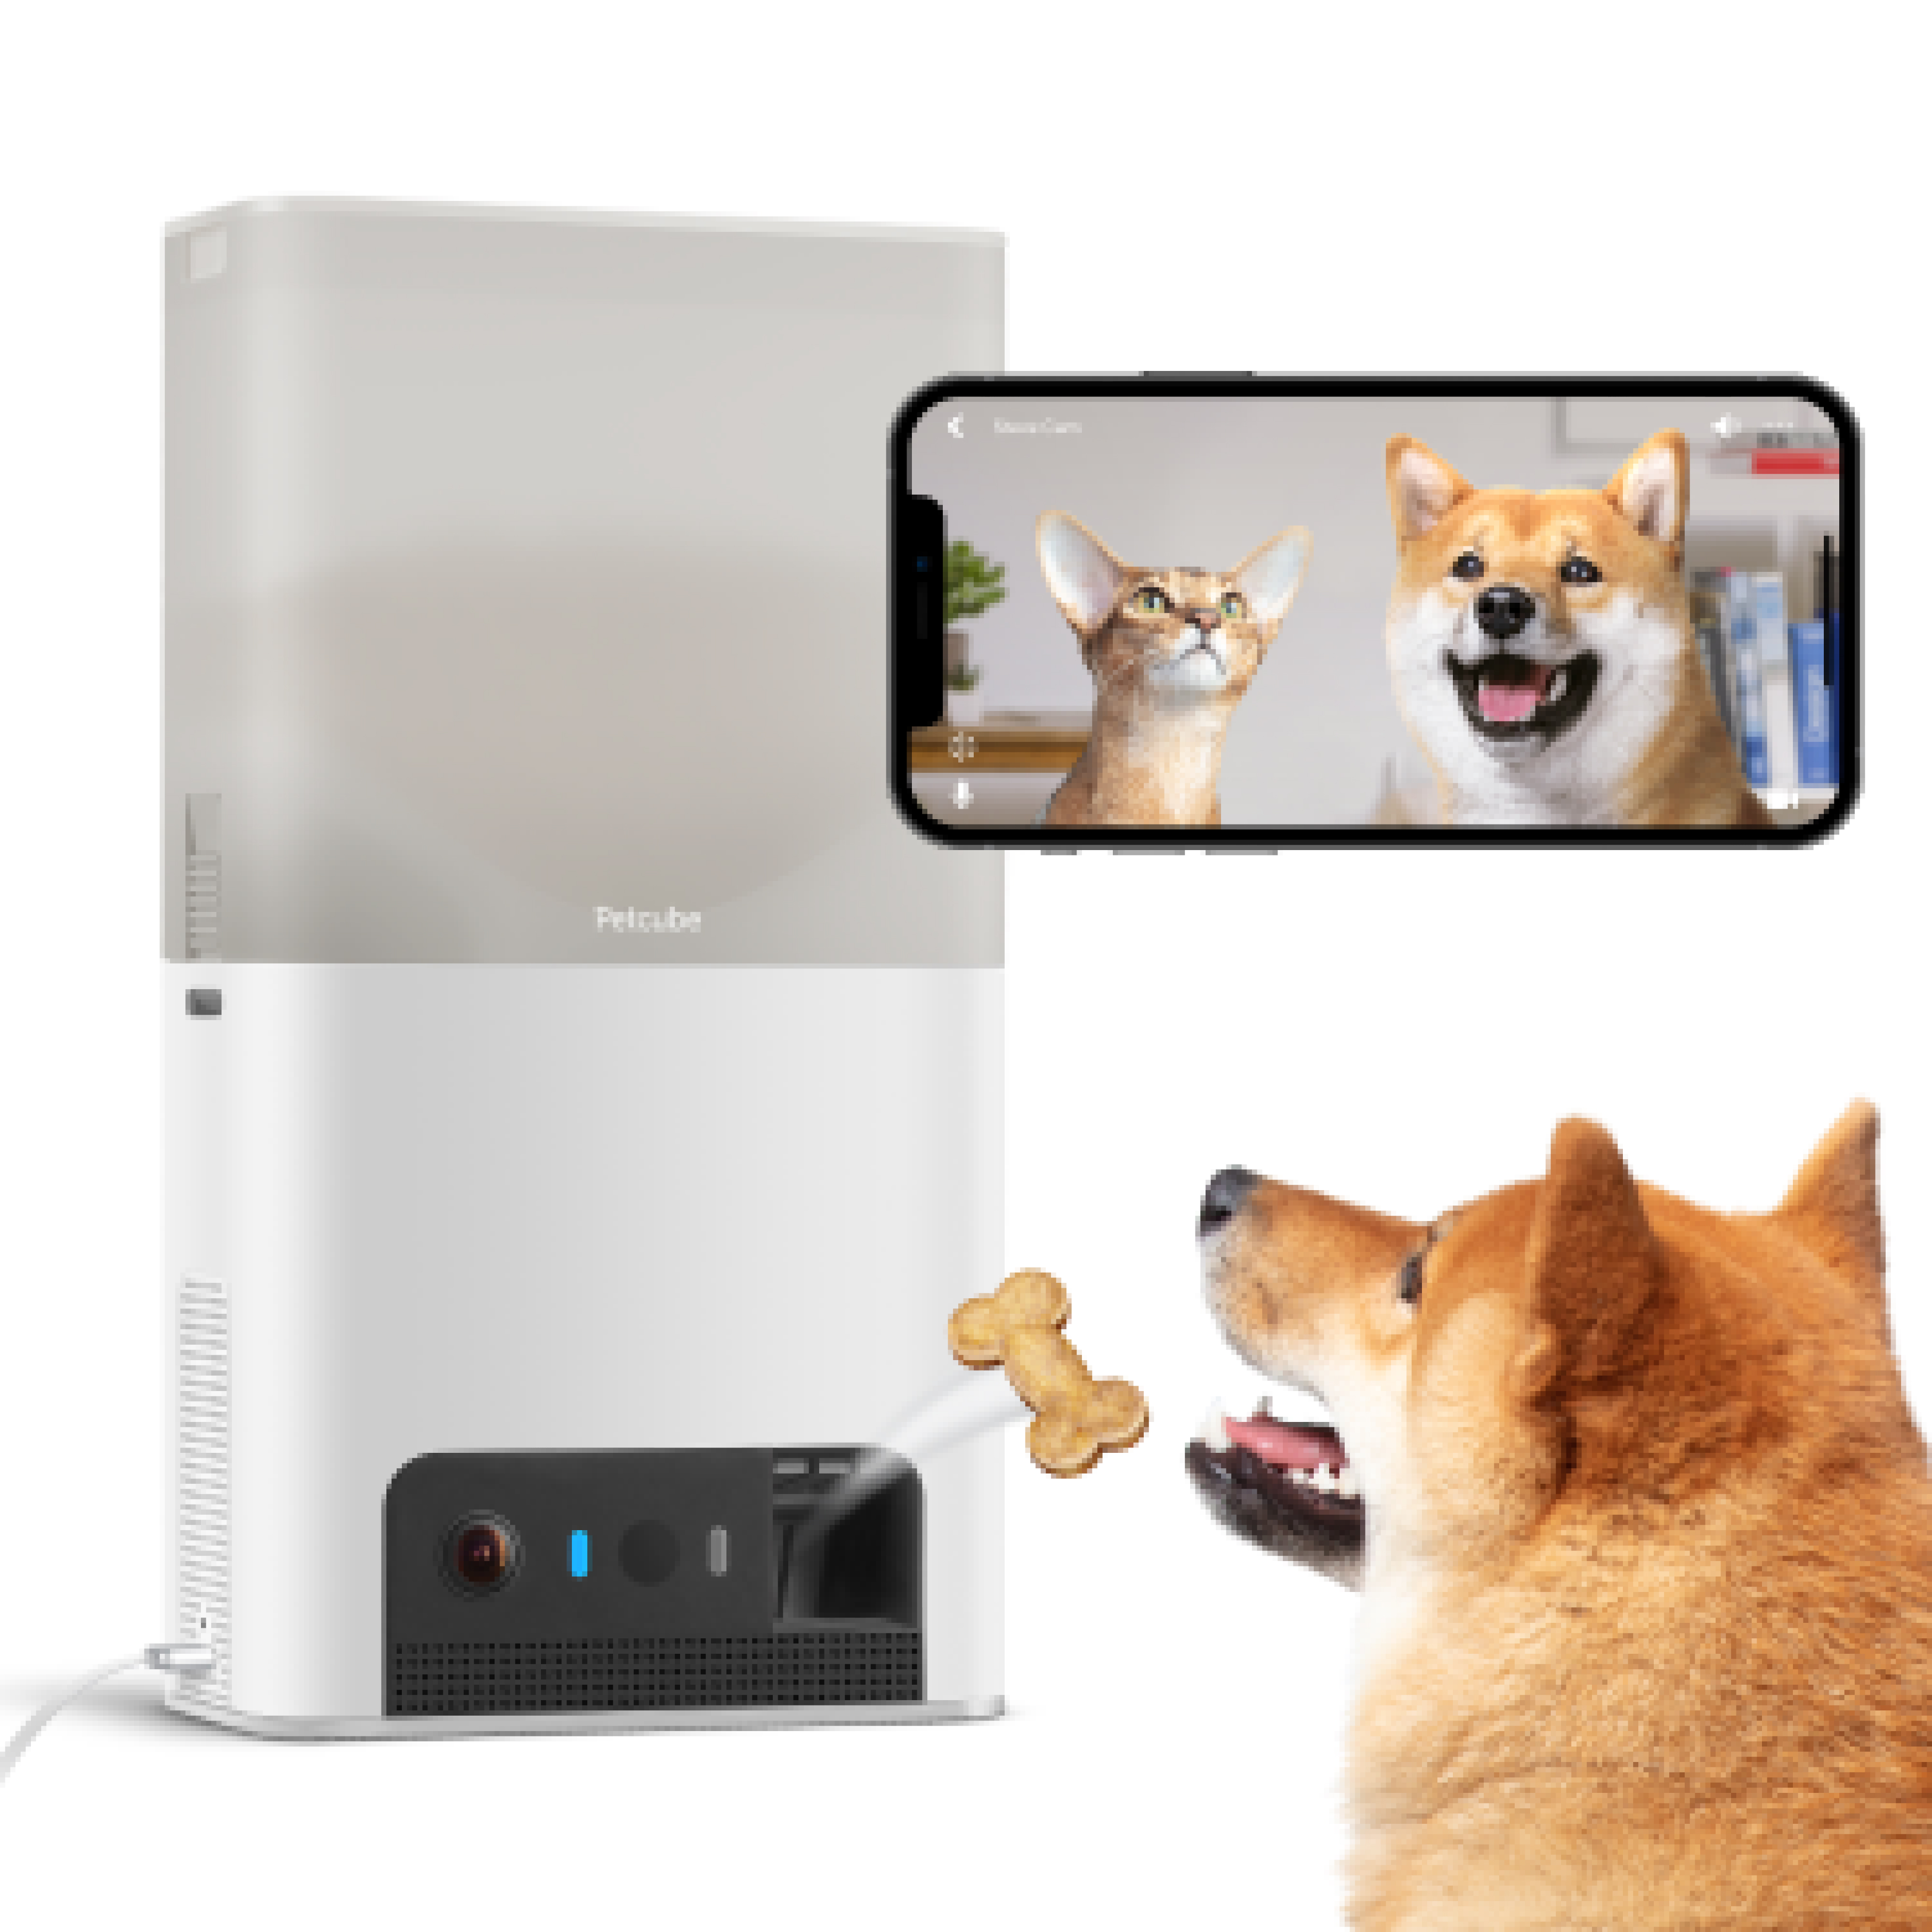 Petcube Bites 2 Lite - Interactive Pet Camera with Treat Dispenser, 1080p HD Video, Night Vision, Two-Way Audio - image 1 of 5